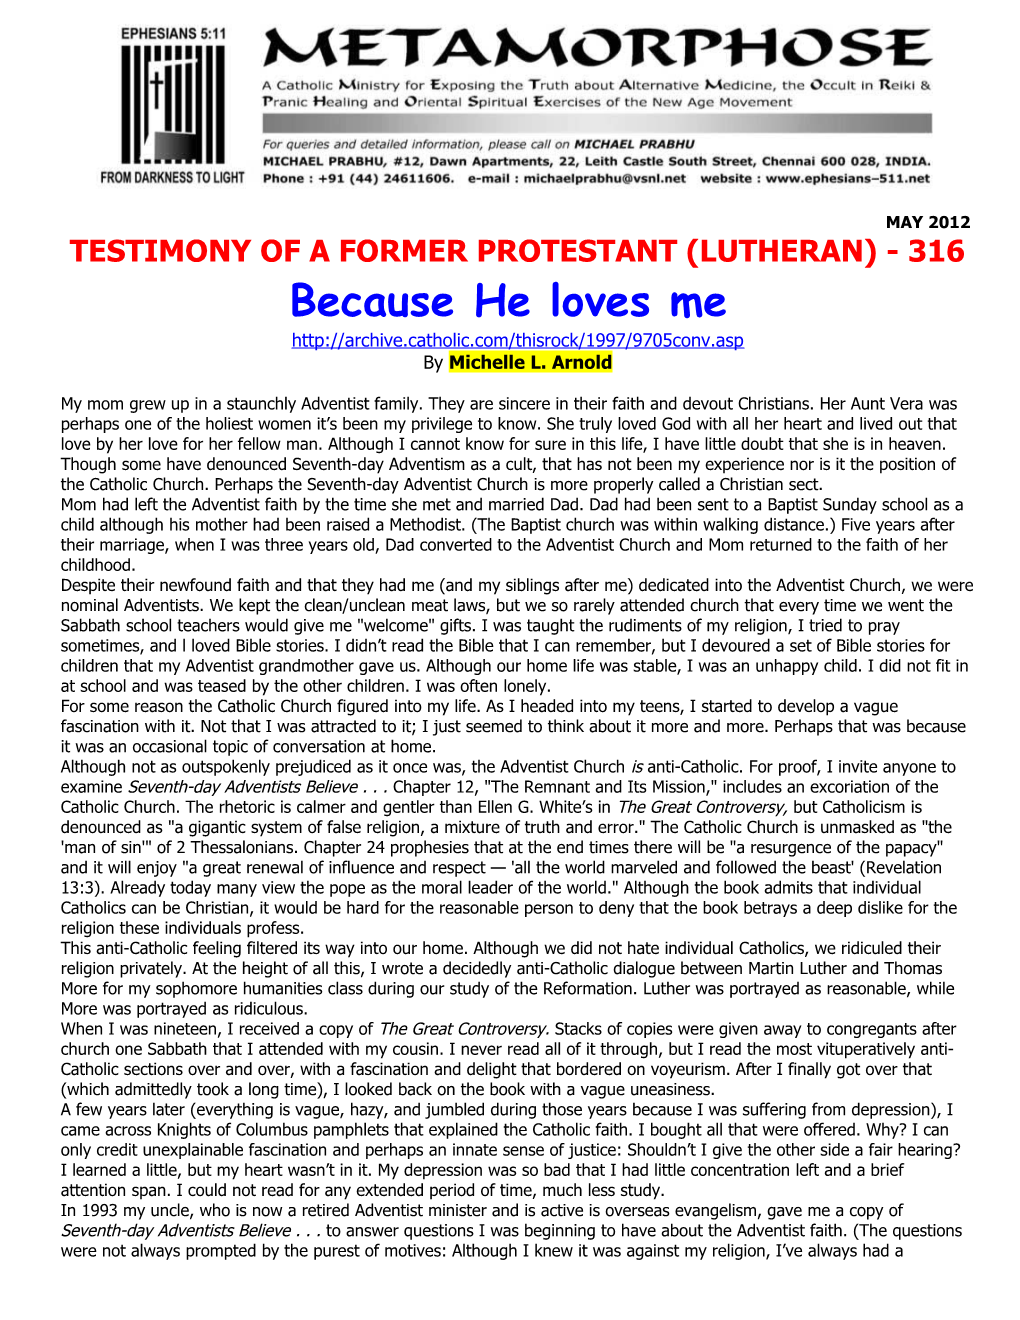 Testimony of a Former Protestant (Lutheran) - 316